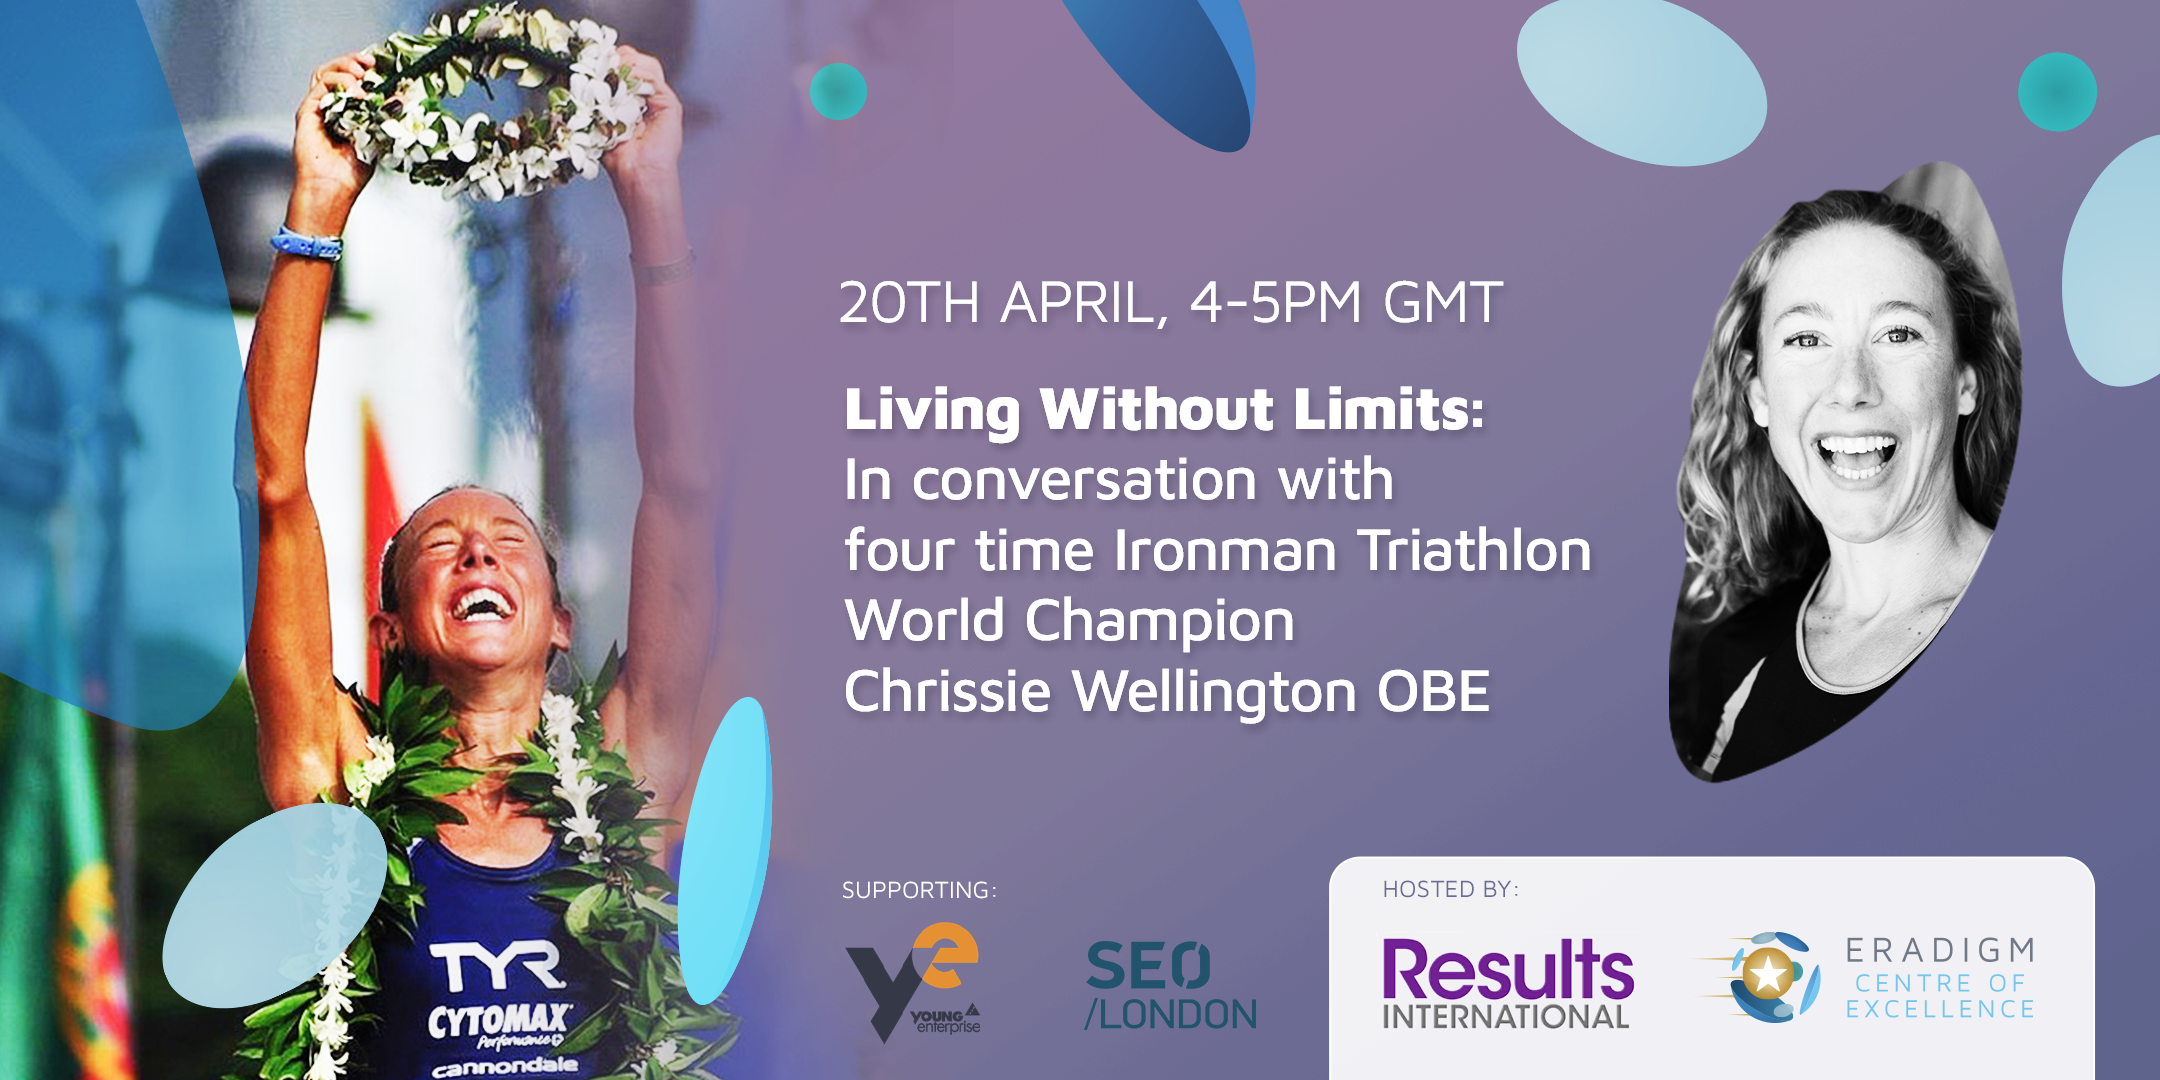 Linkedin banner for event called Living Without Limits, hosted by Eradigm